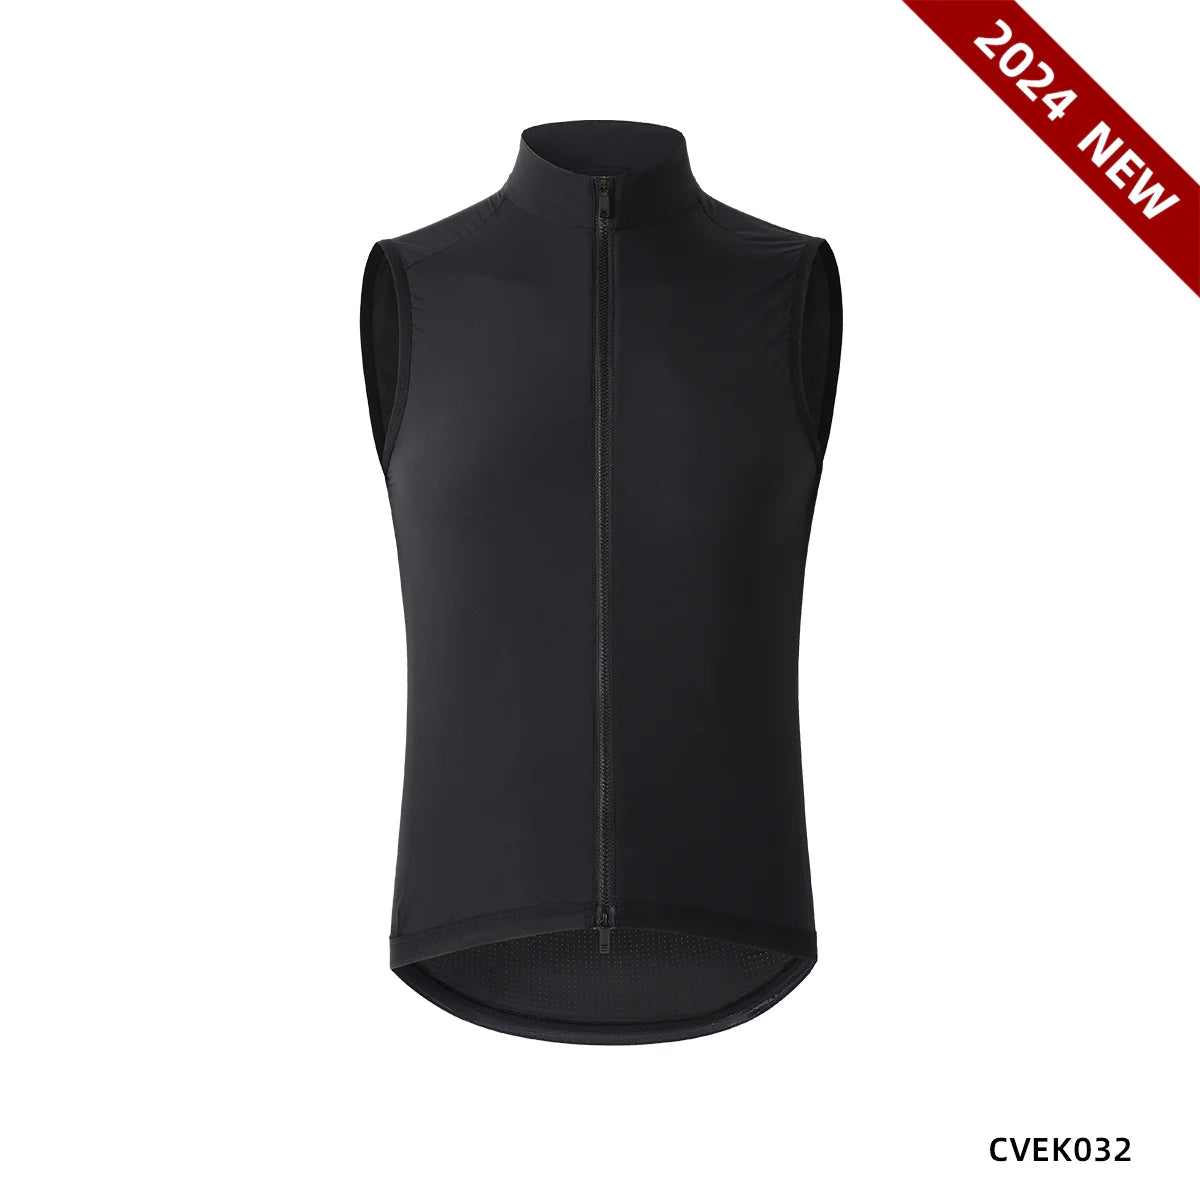 Stay Light and Protected with Our Packable Gilet